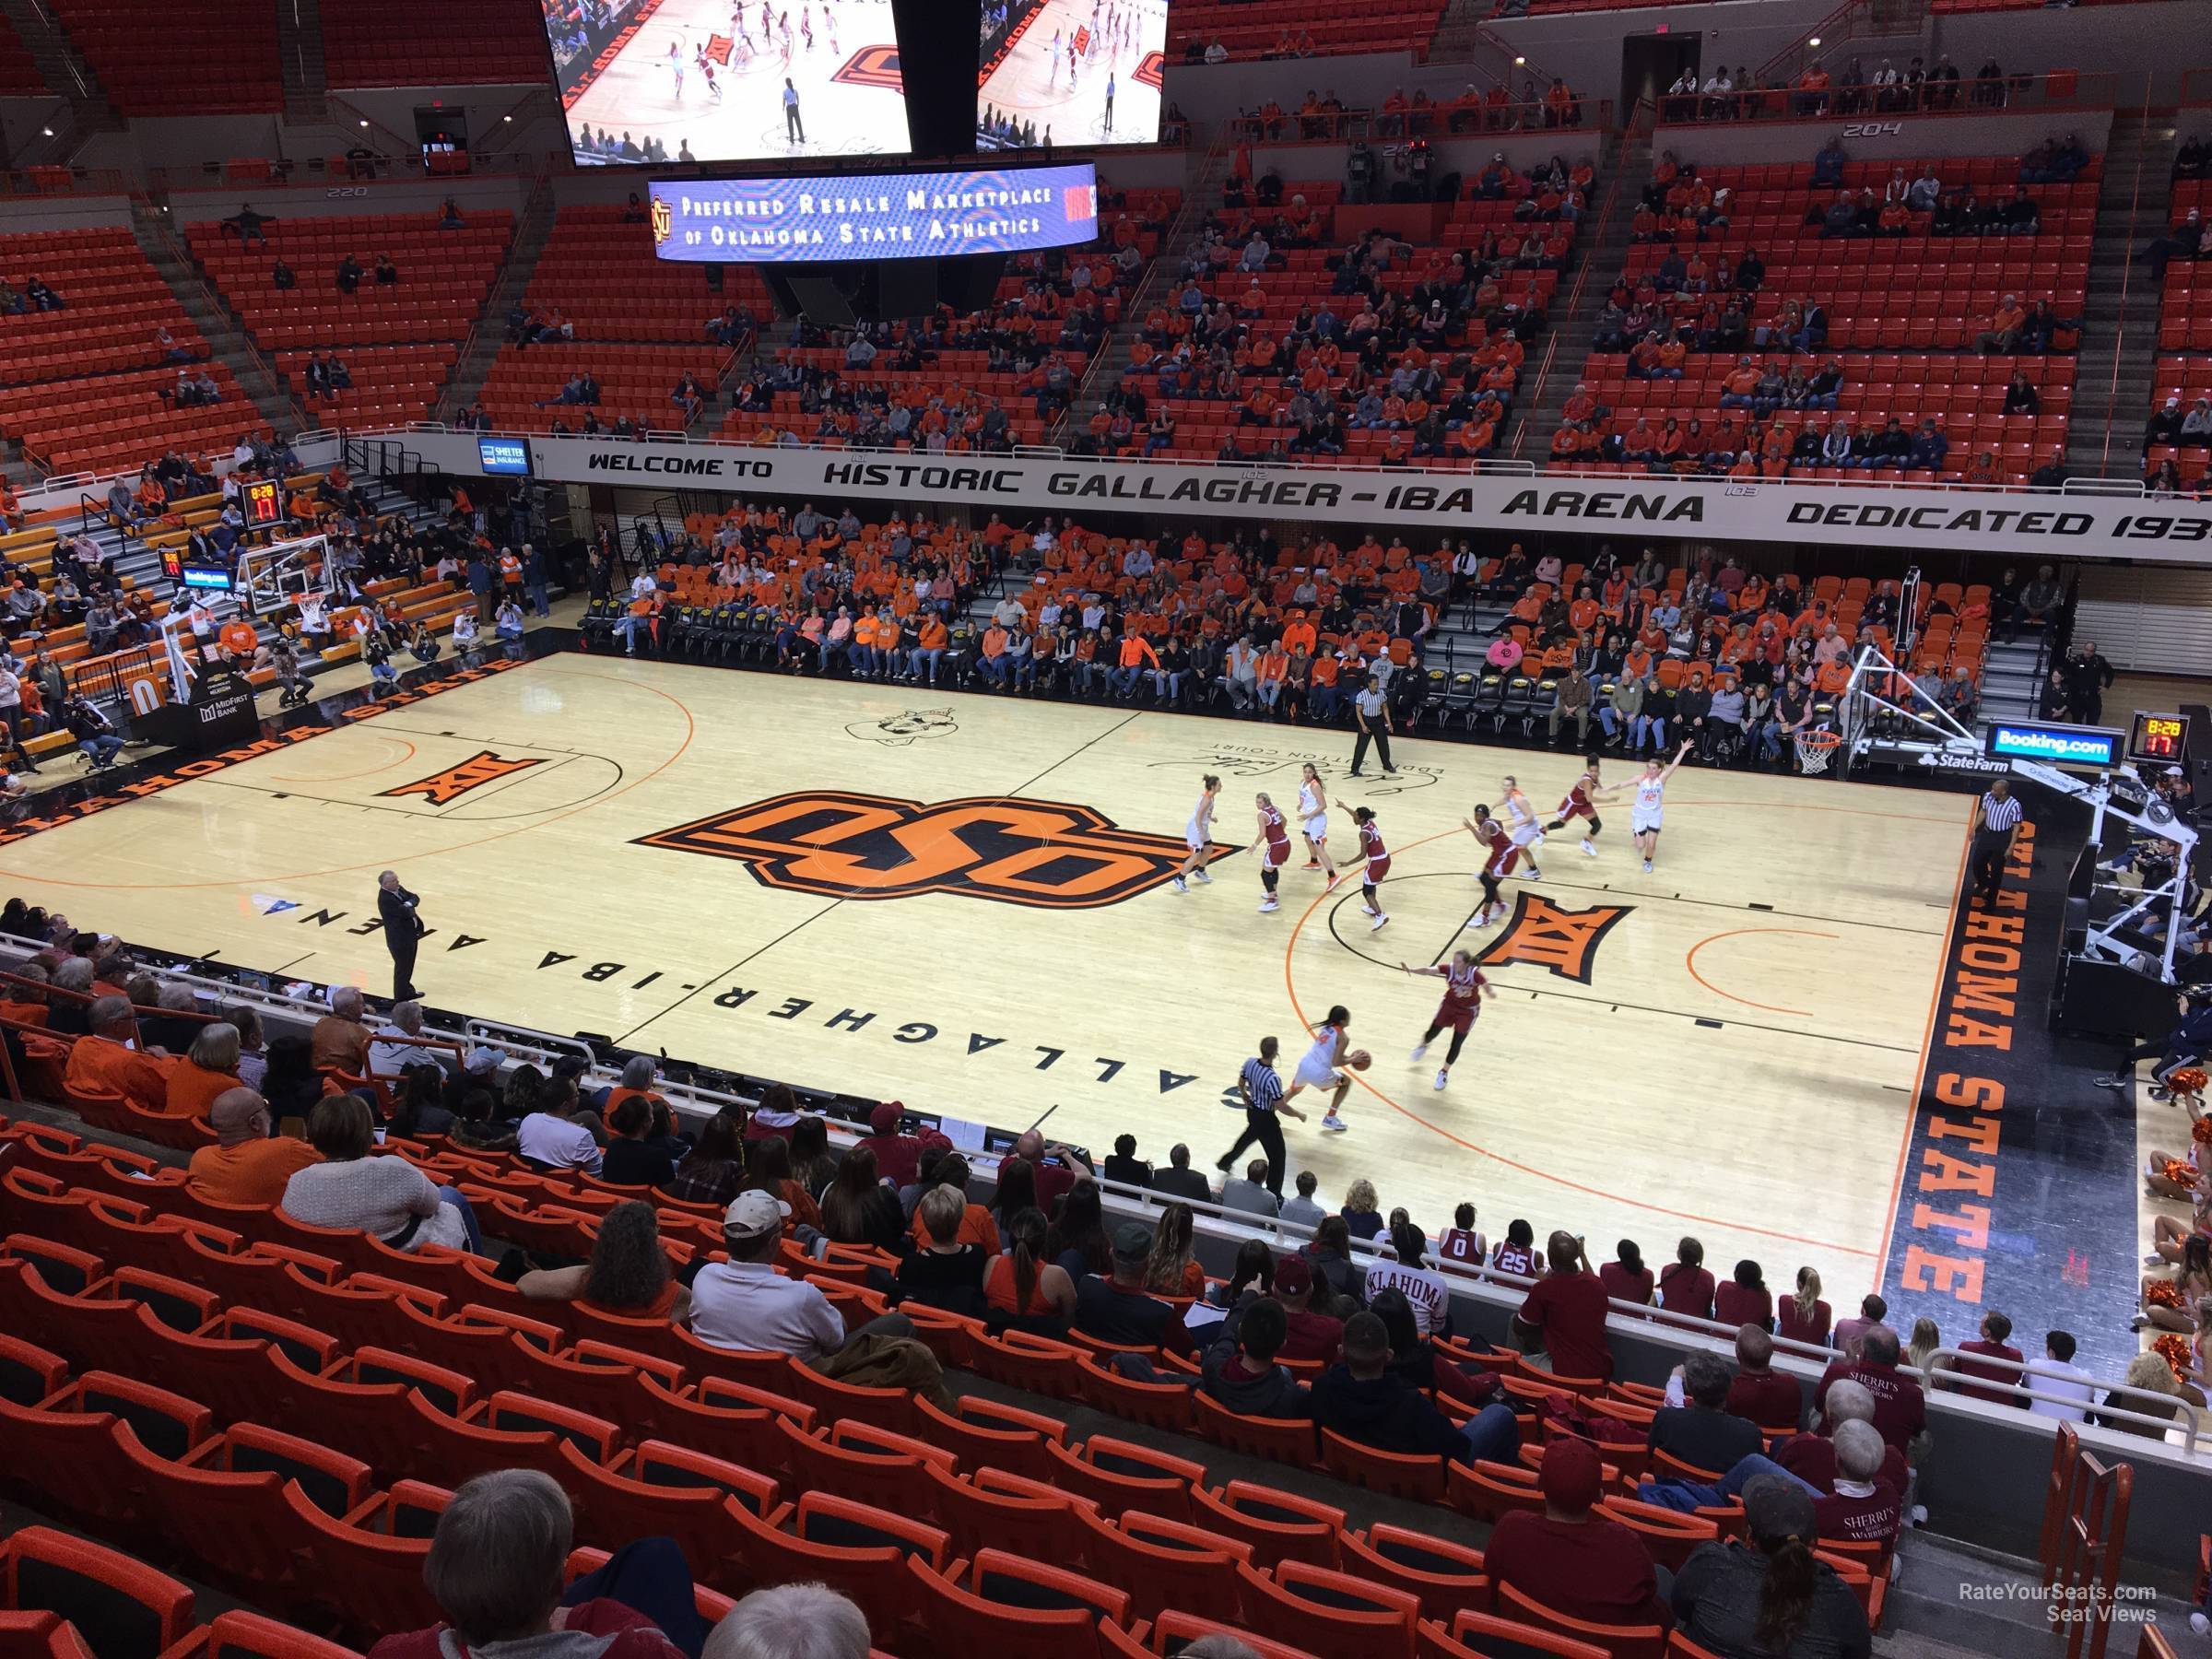 section 212, row 13 seat view  - gallagher-iba arena